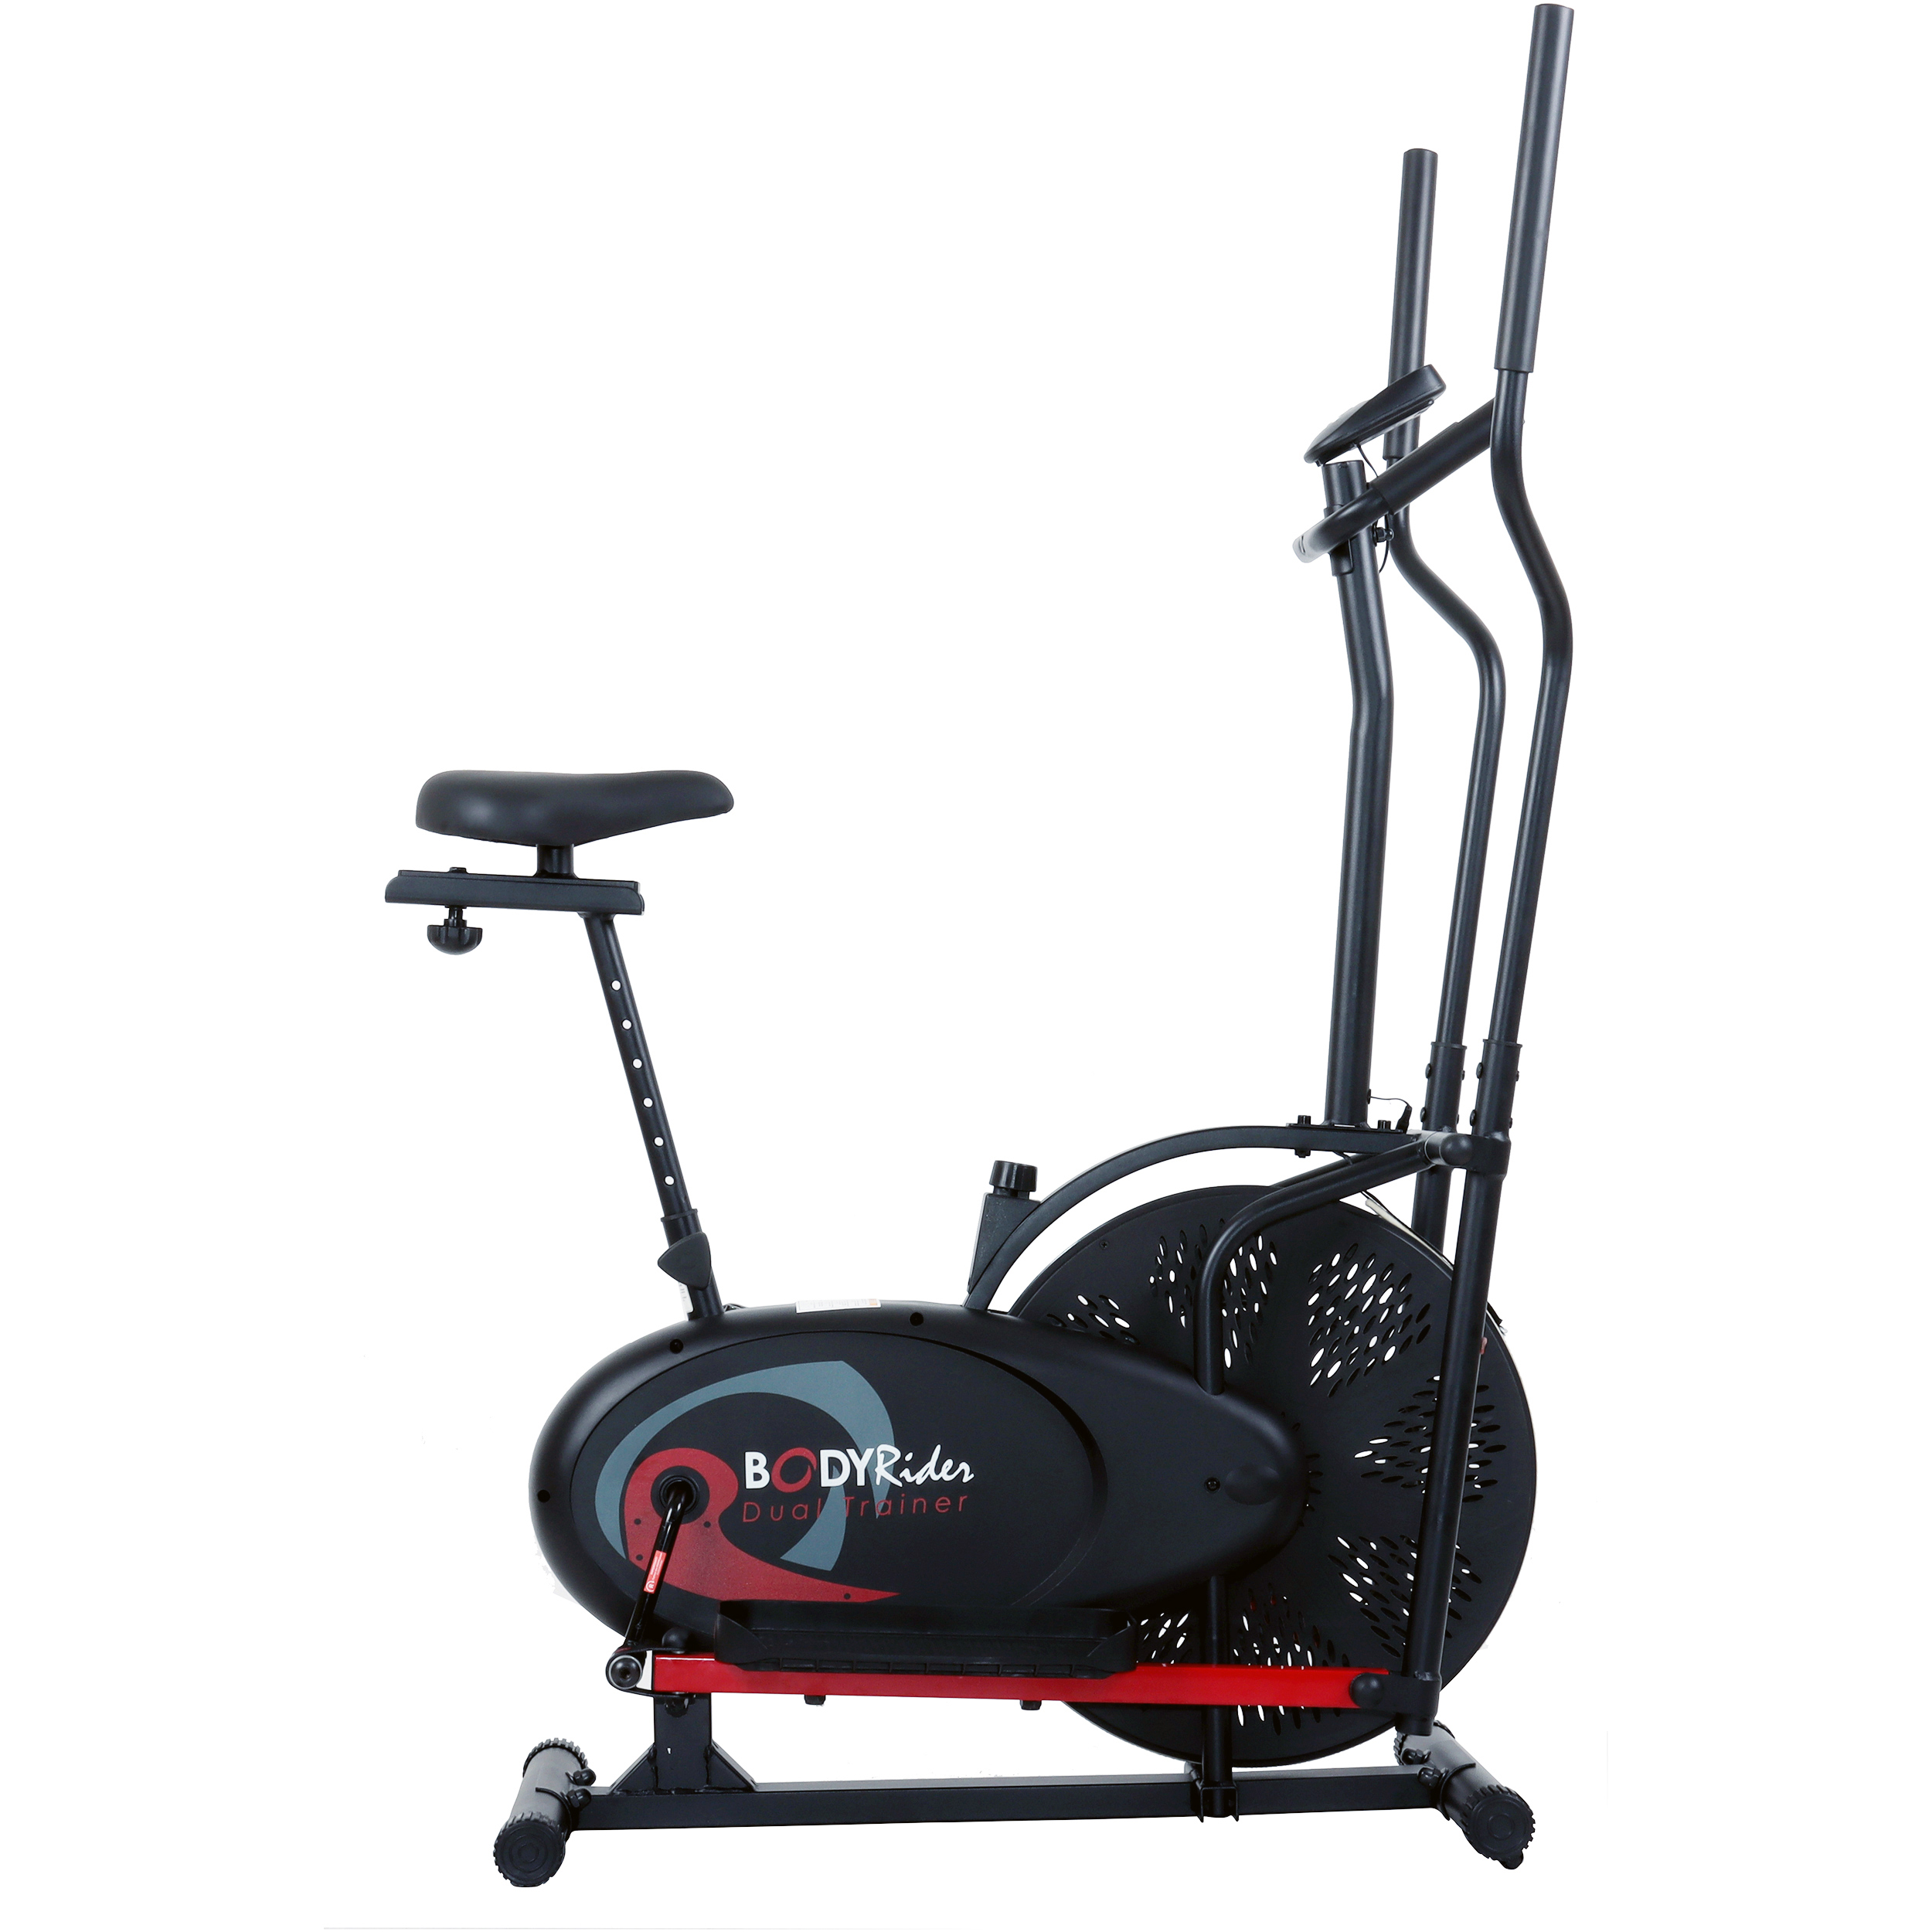 Body Rider BRD2000 2 in1 Elliptical Trainer Stationary Exercise Bike LCD Display, Stride Length 12.5 Inches, Max Weight 250 Lbs. - image 1 of 9